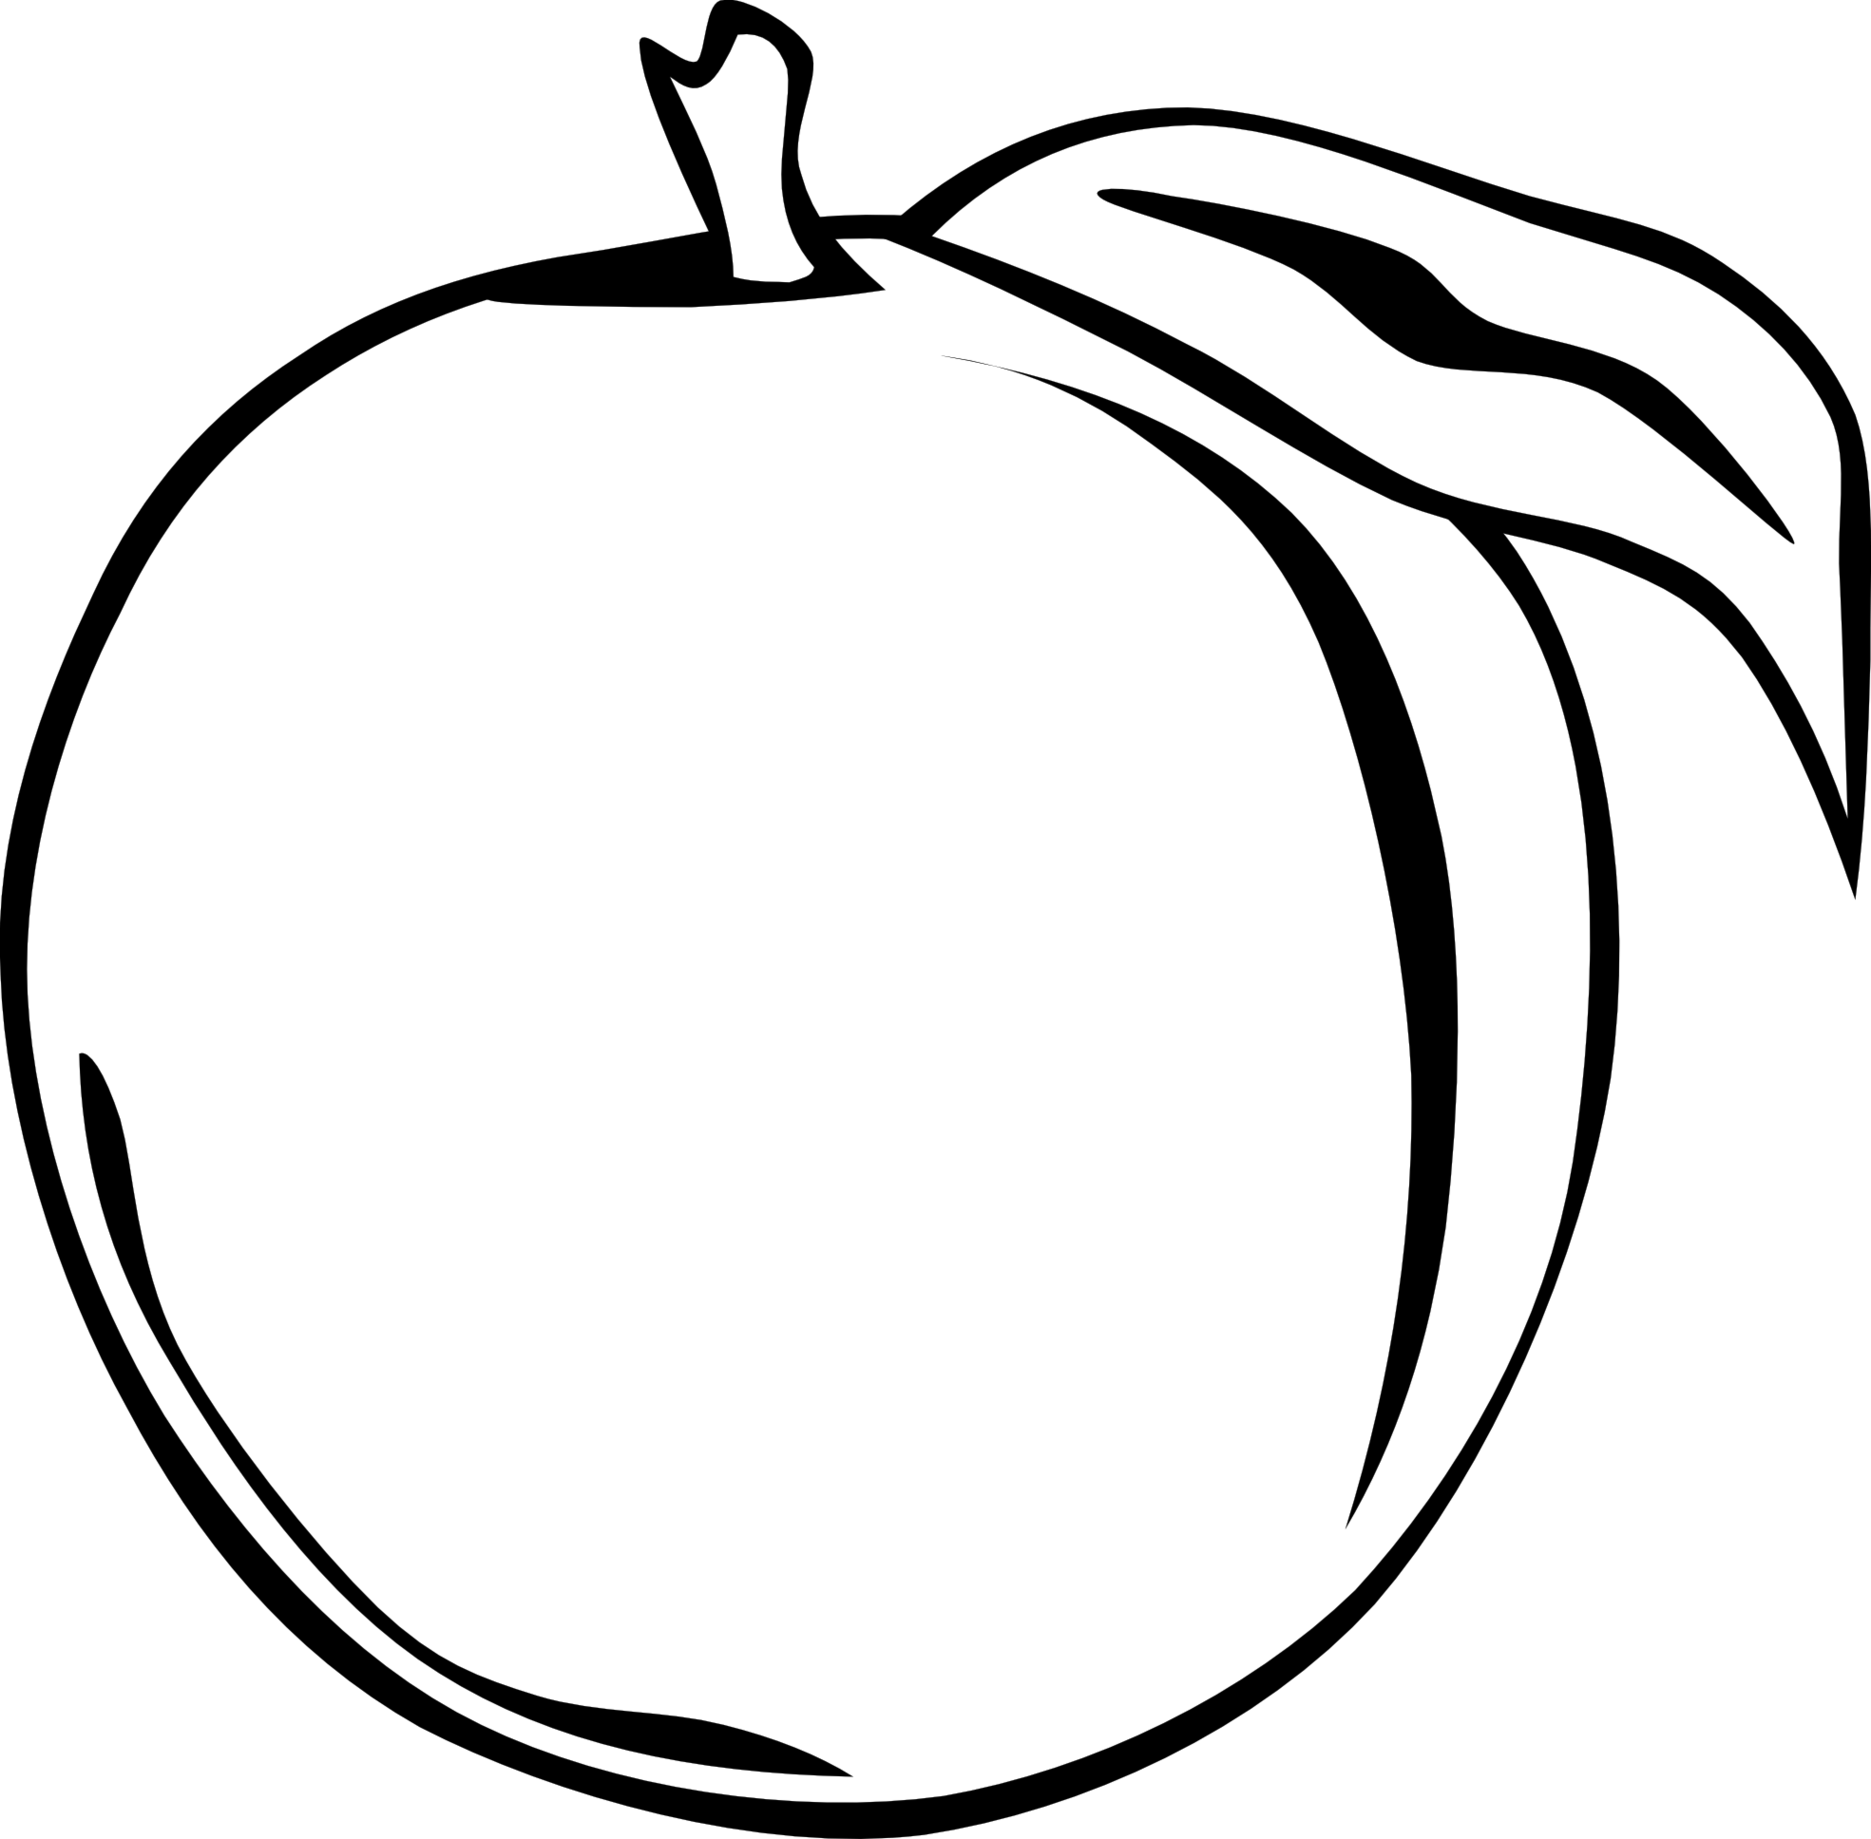 clipart of fruits black and white - photo #23